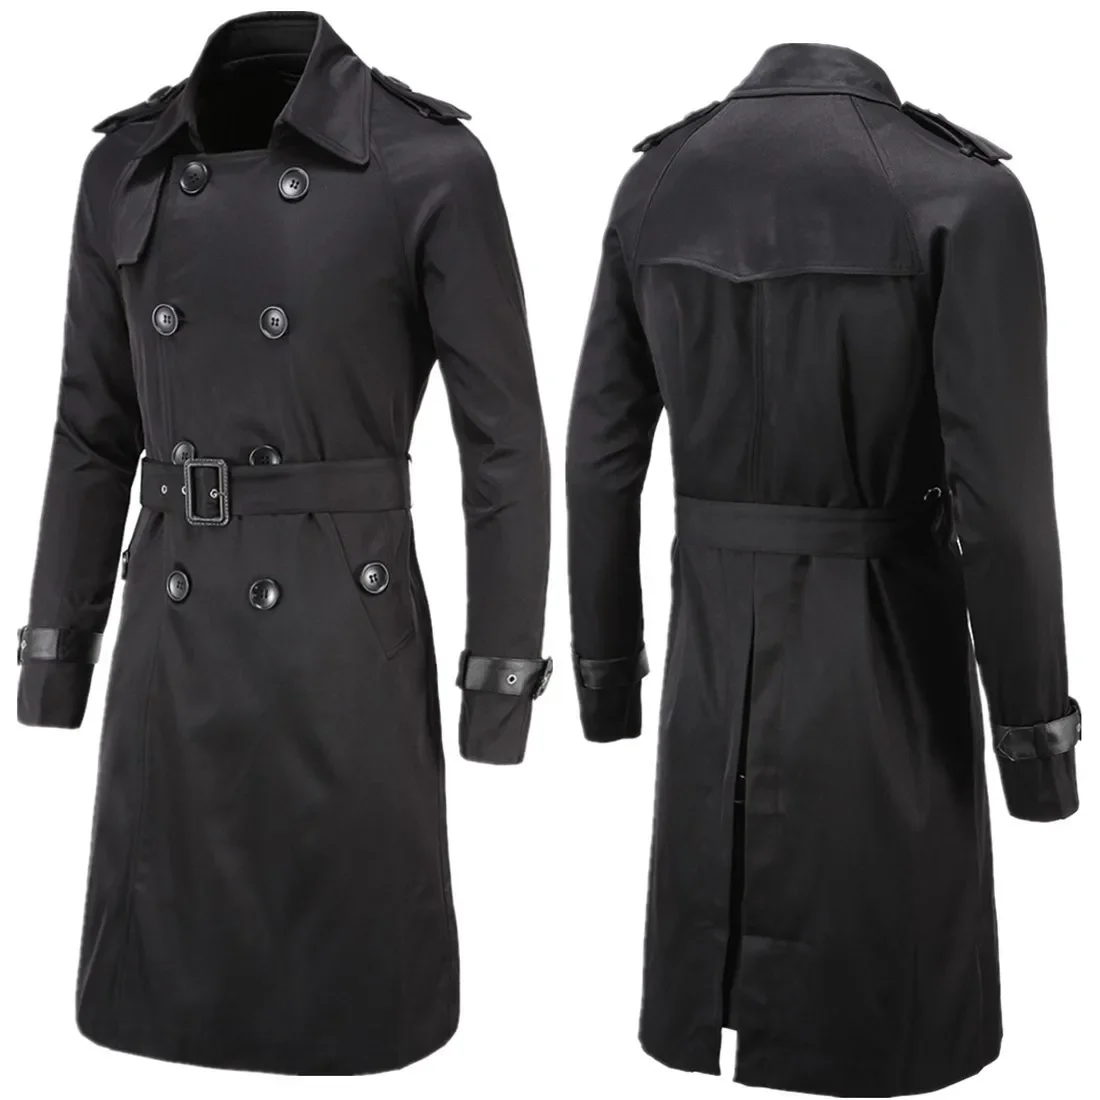 

Mens Spring Autumn Windbreak Overcoat Long Trench Coats with Belt Male Pea Coat Double Breasted Peacoat